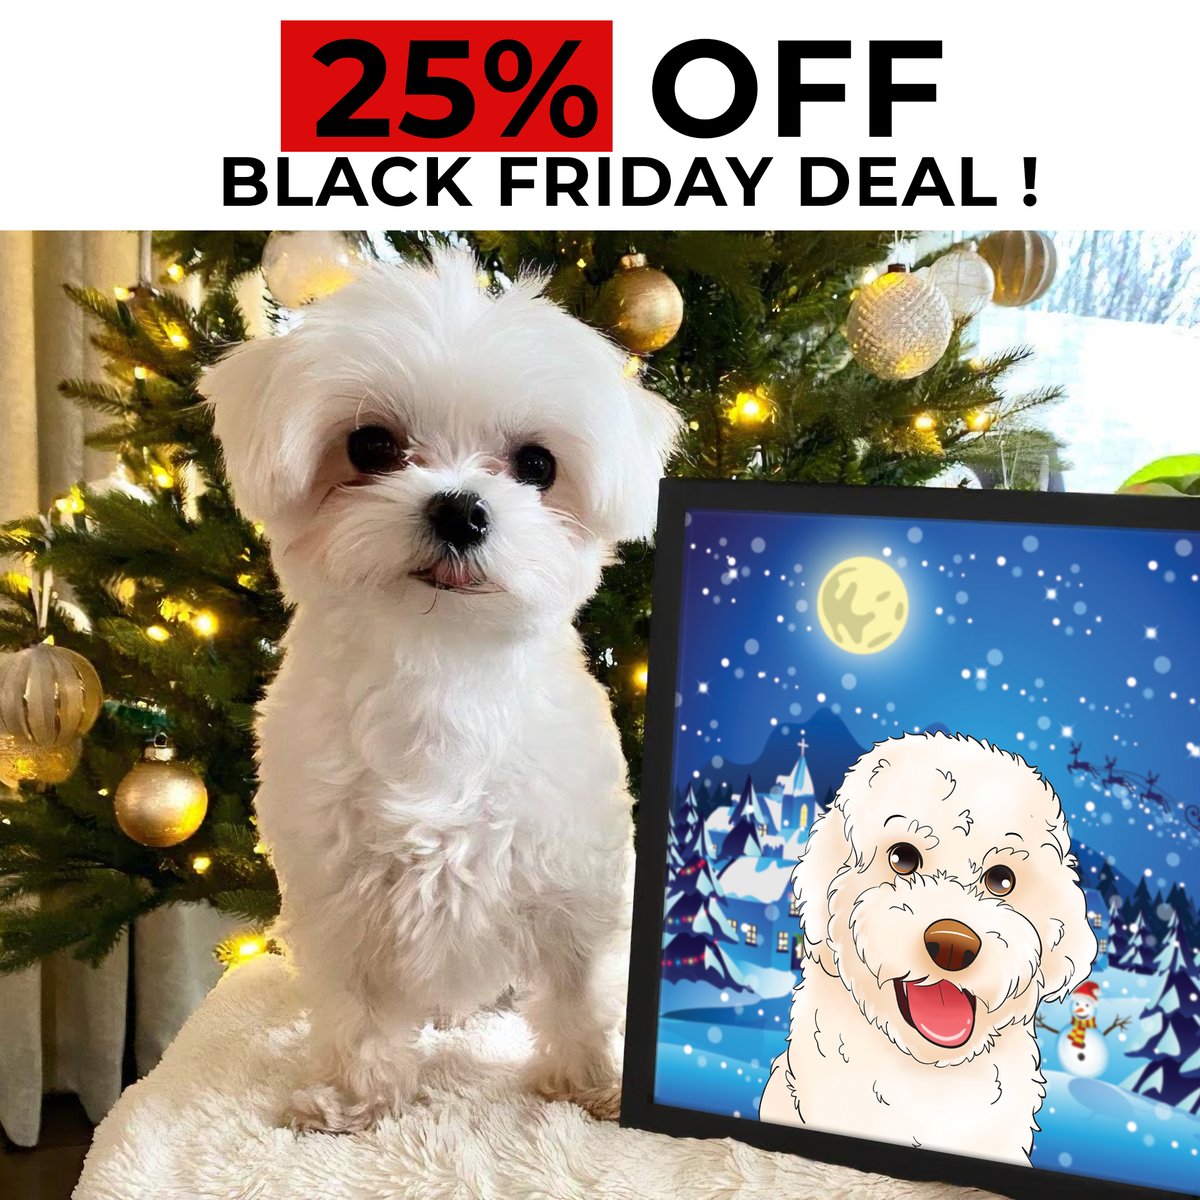 Celebrate your pet's unique charm with a hand-painted portrait. A gift that lasts forever. #CustomPetArt #funnycustomart #petportraits